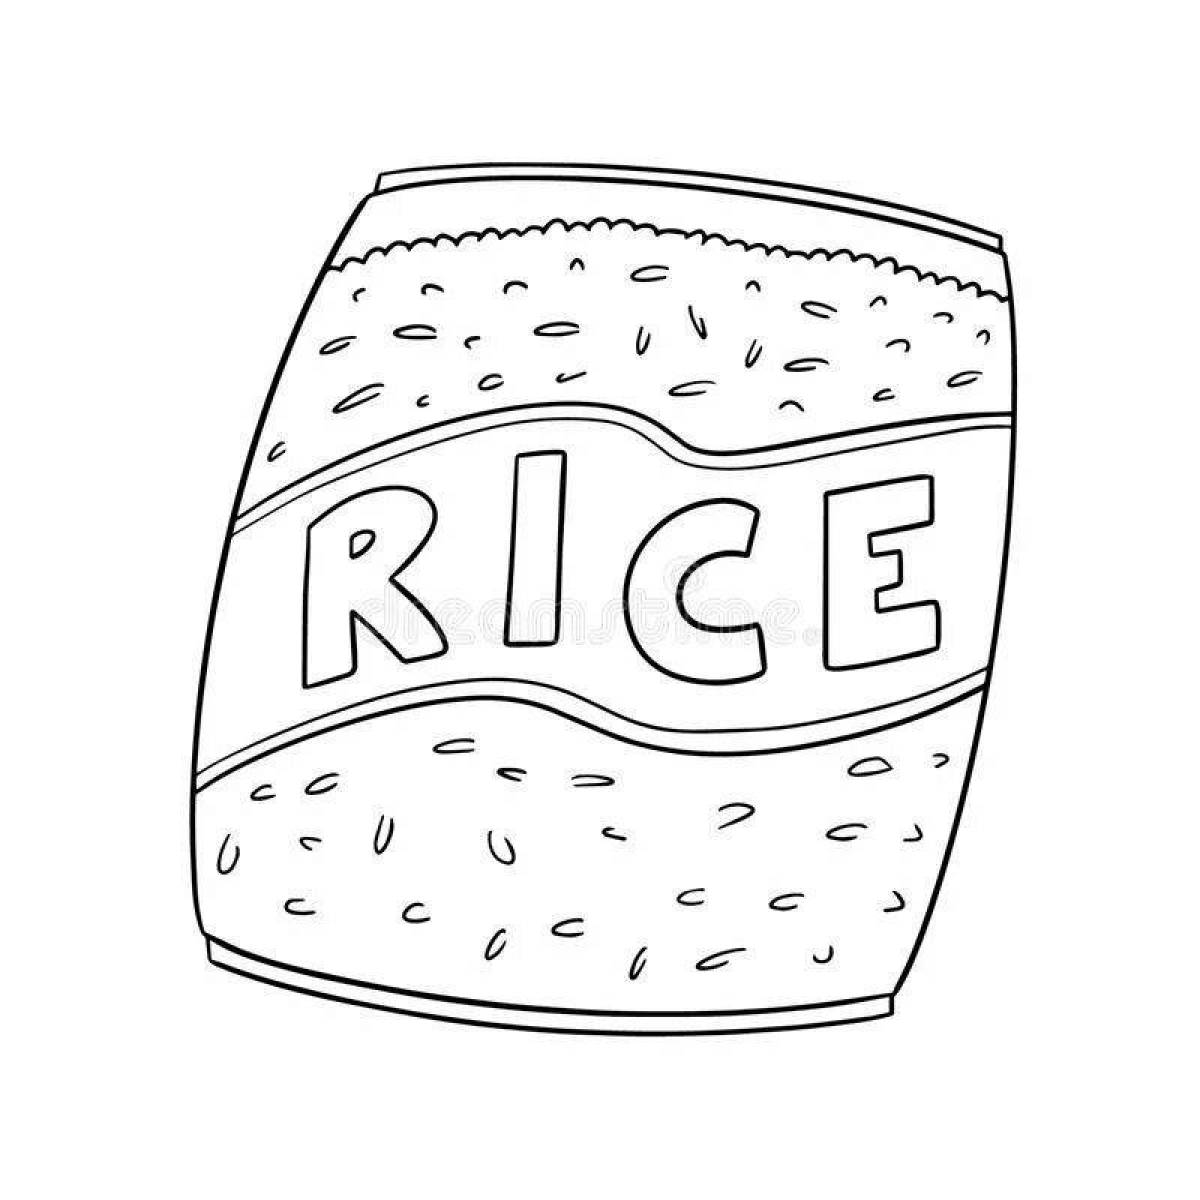 Live rice coloring